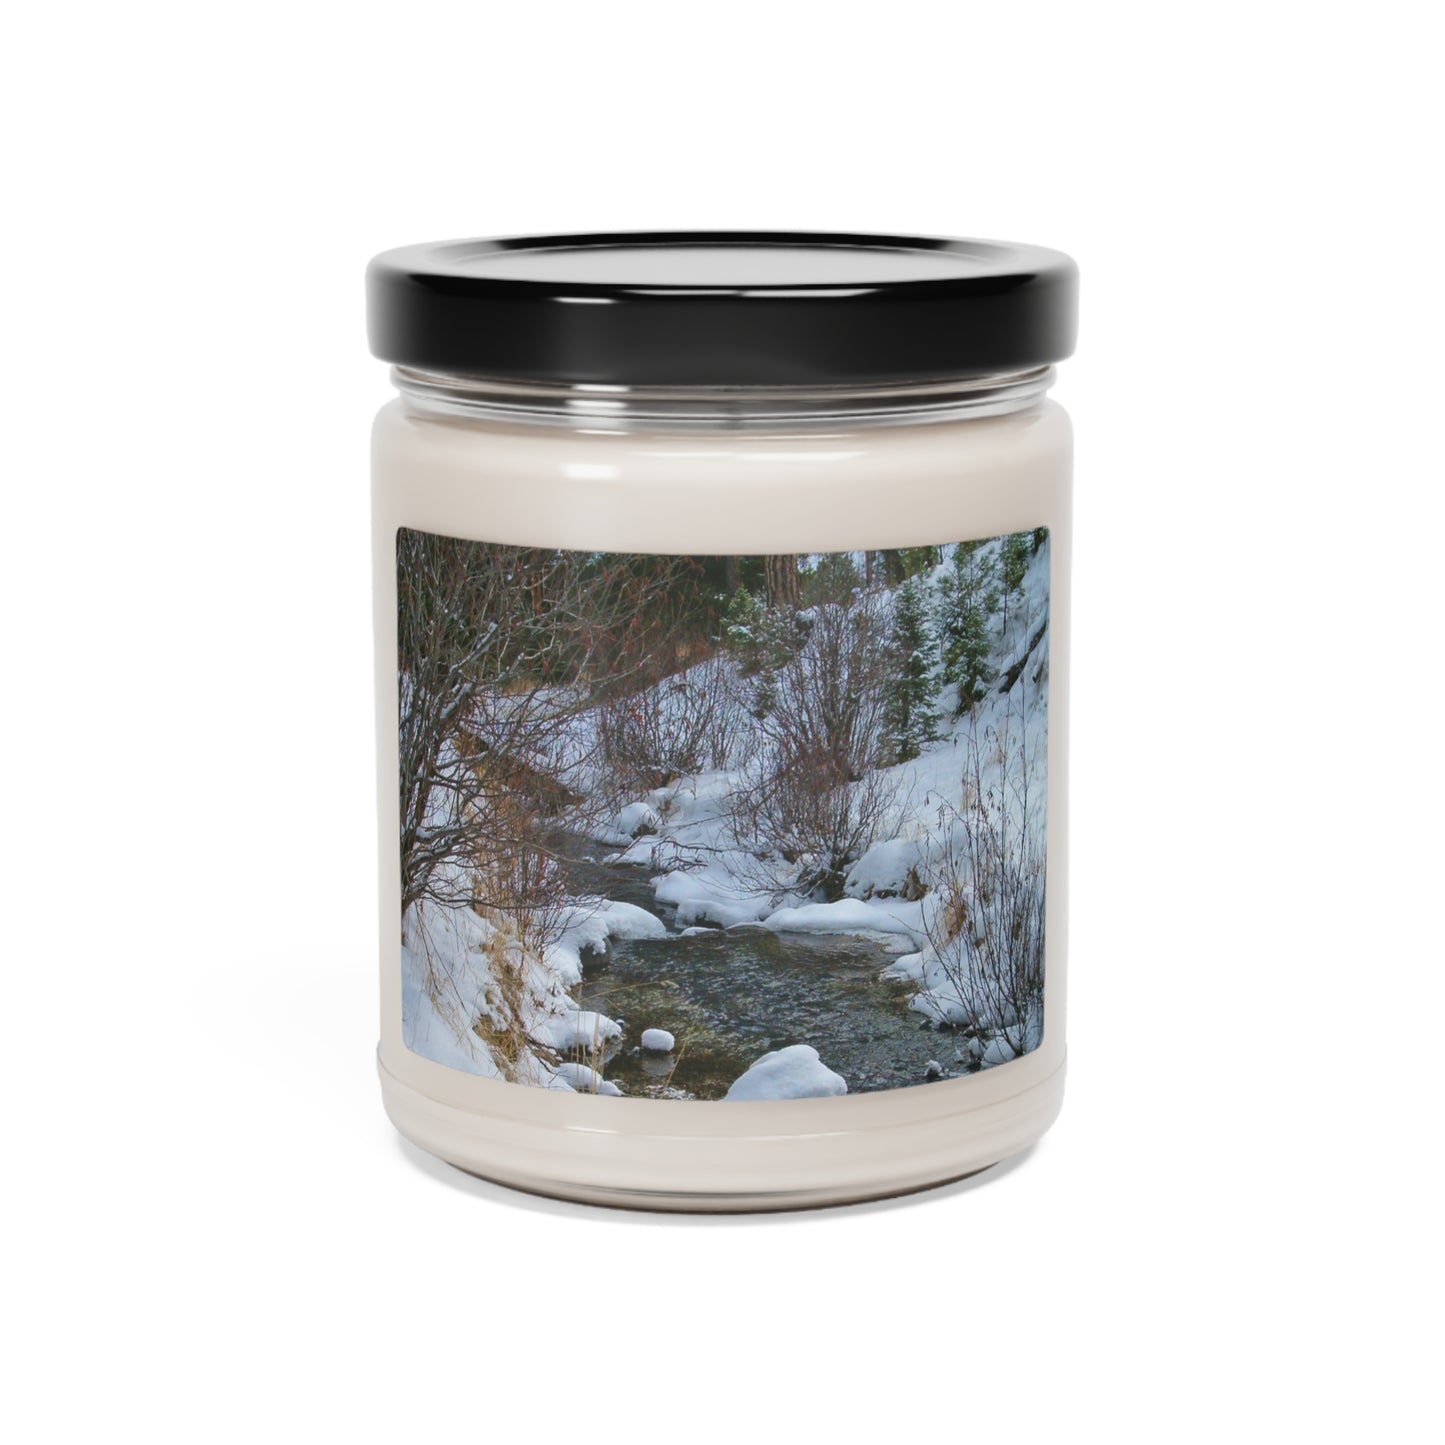 Snowy Creek Scented Soy Candle, 9oz